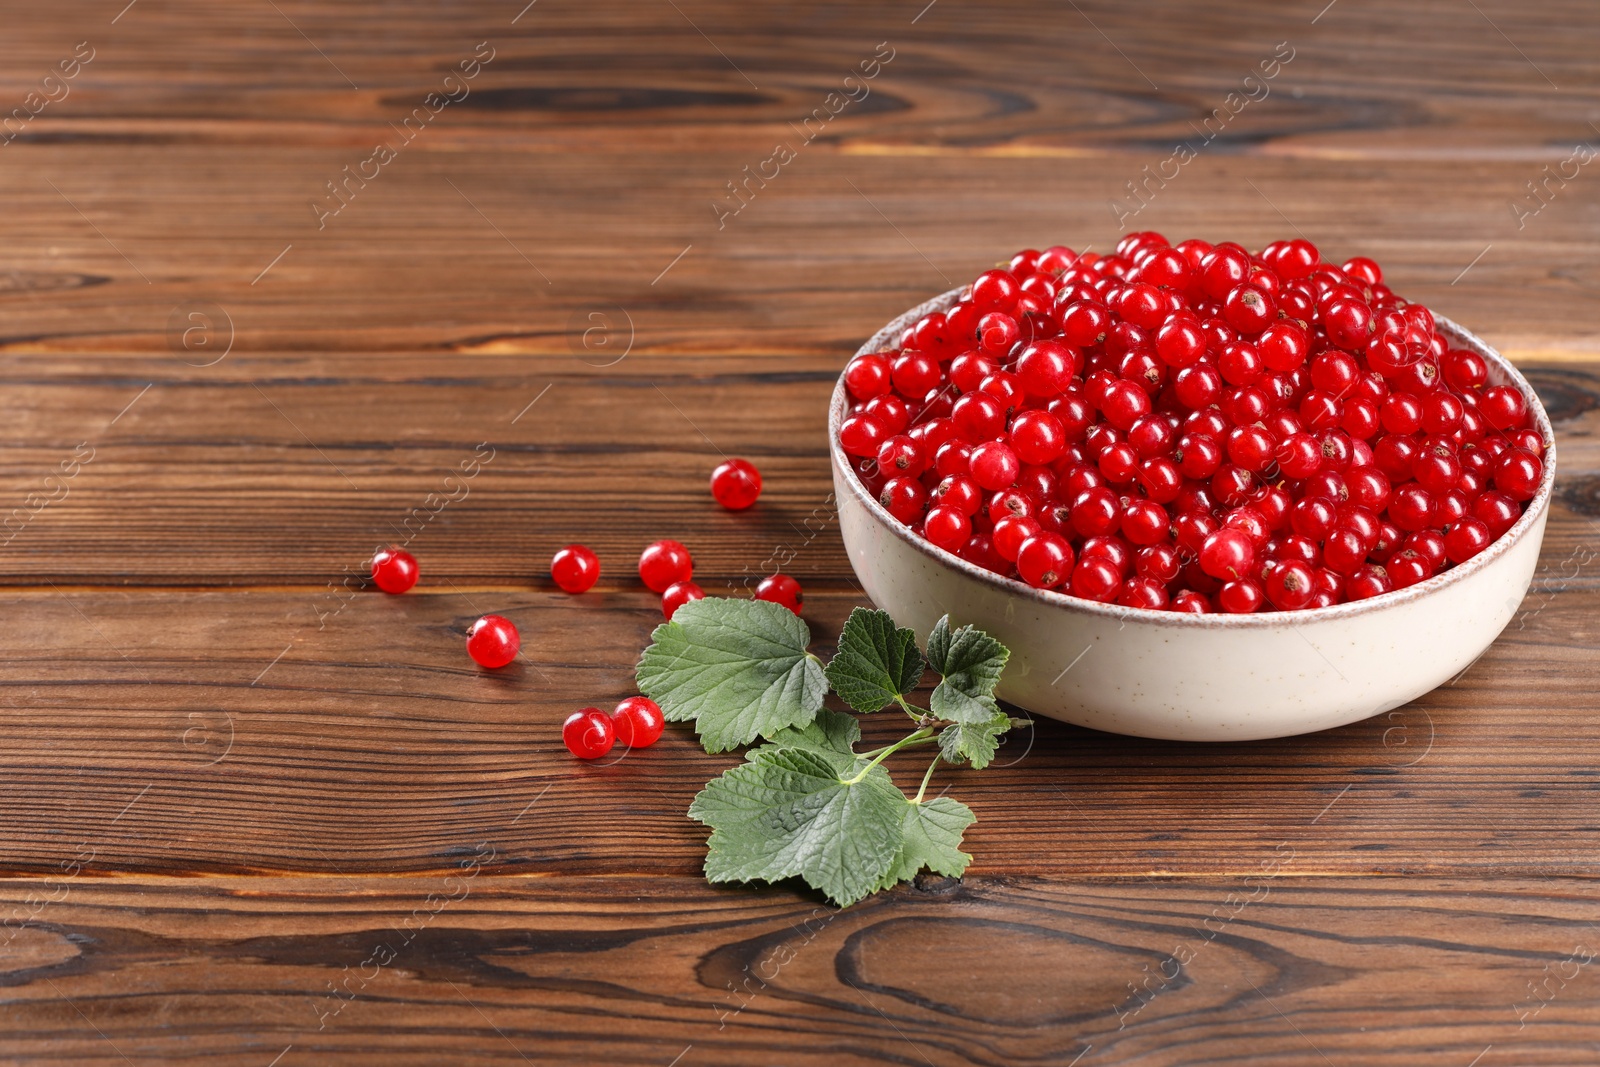 Photo of Ripe red currants and leaves on wooden table. Space for text